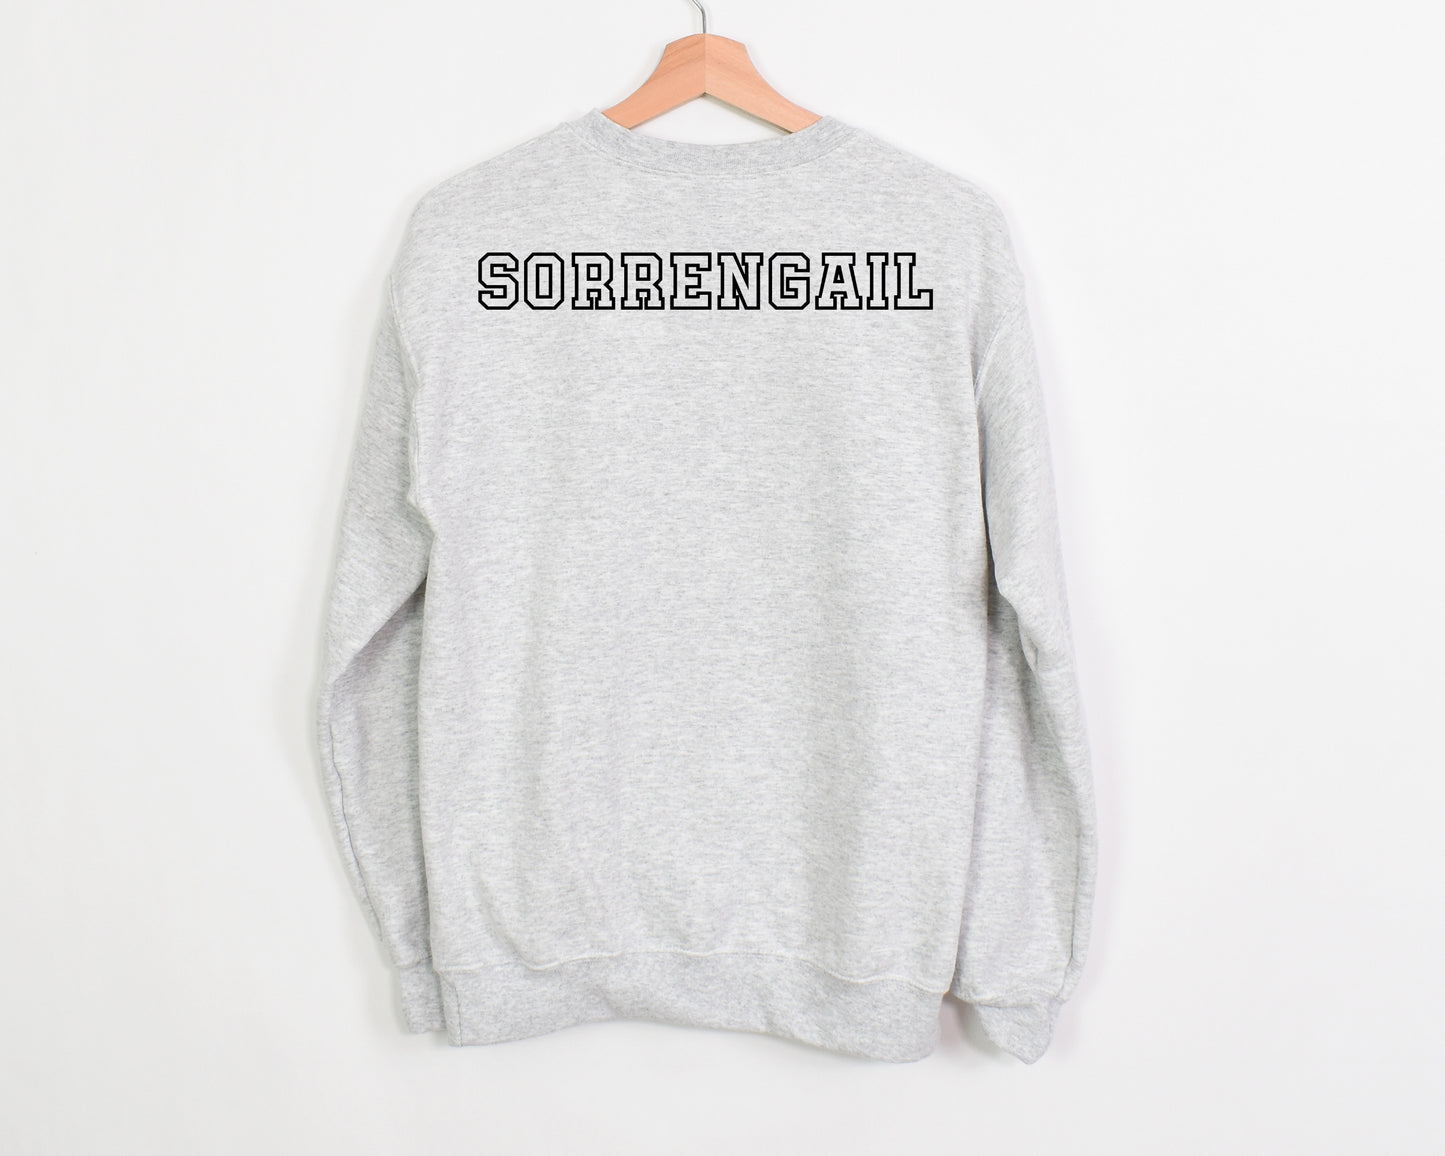 Embroidered Violet Sorrengail Sweatshirt with Black Lettering